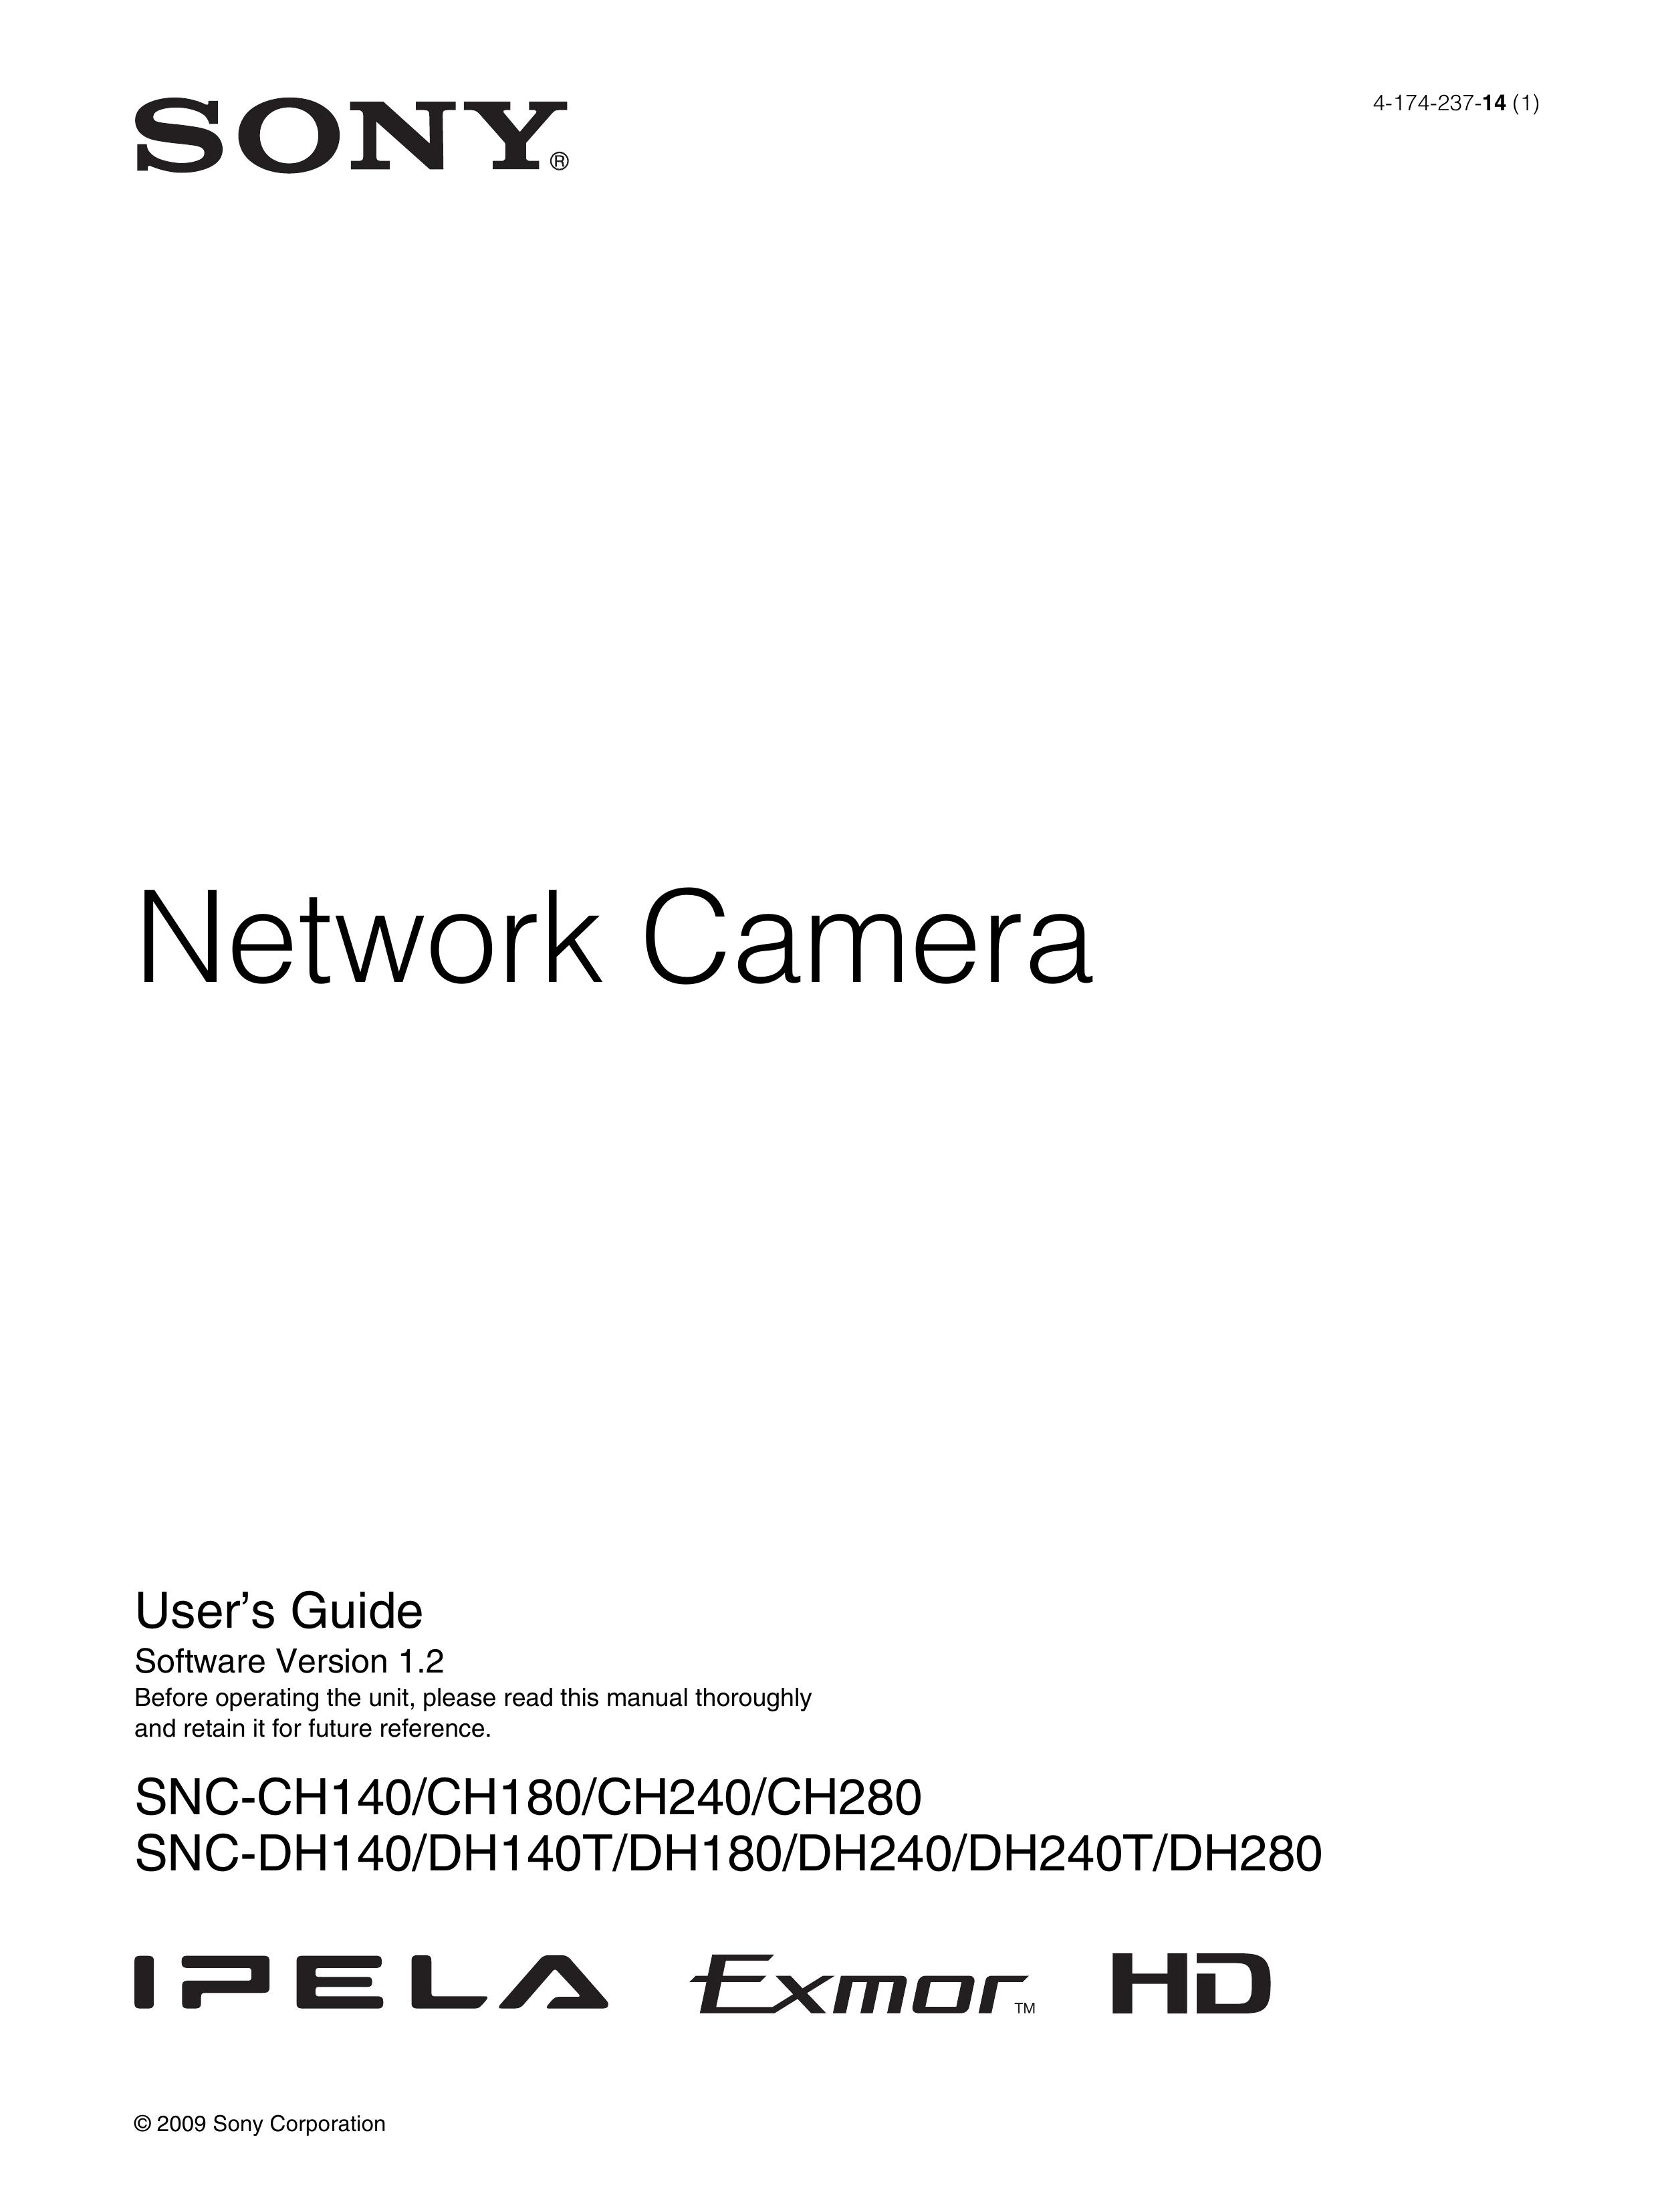 Sony DH280 Security Camera User Manual